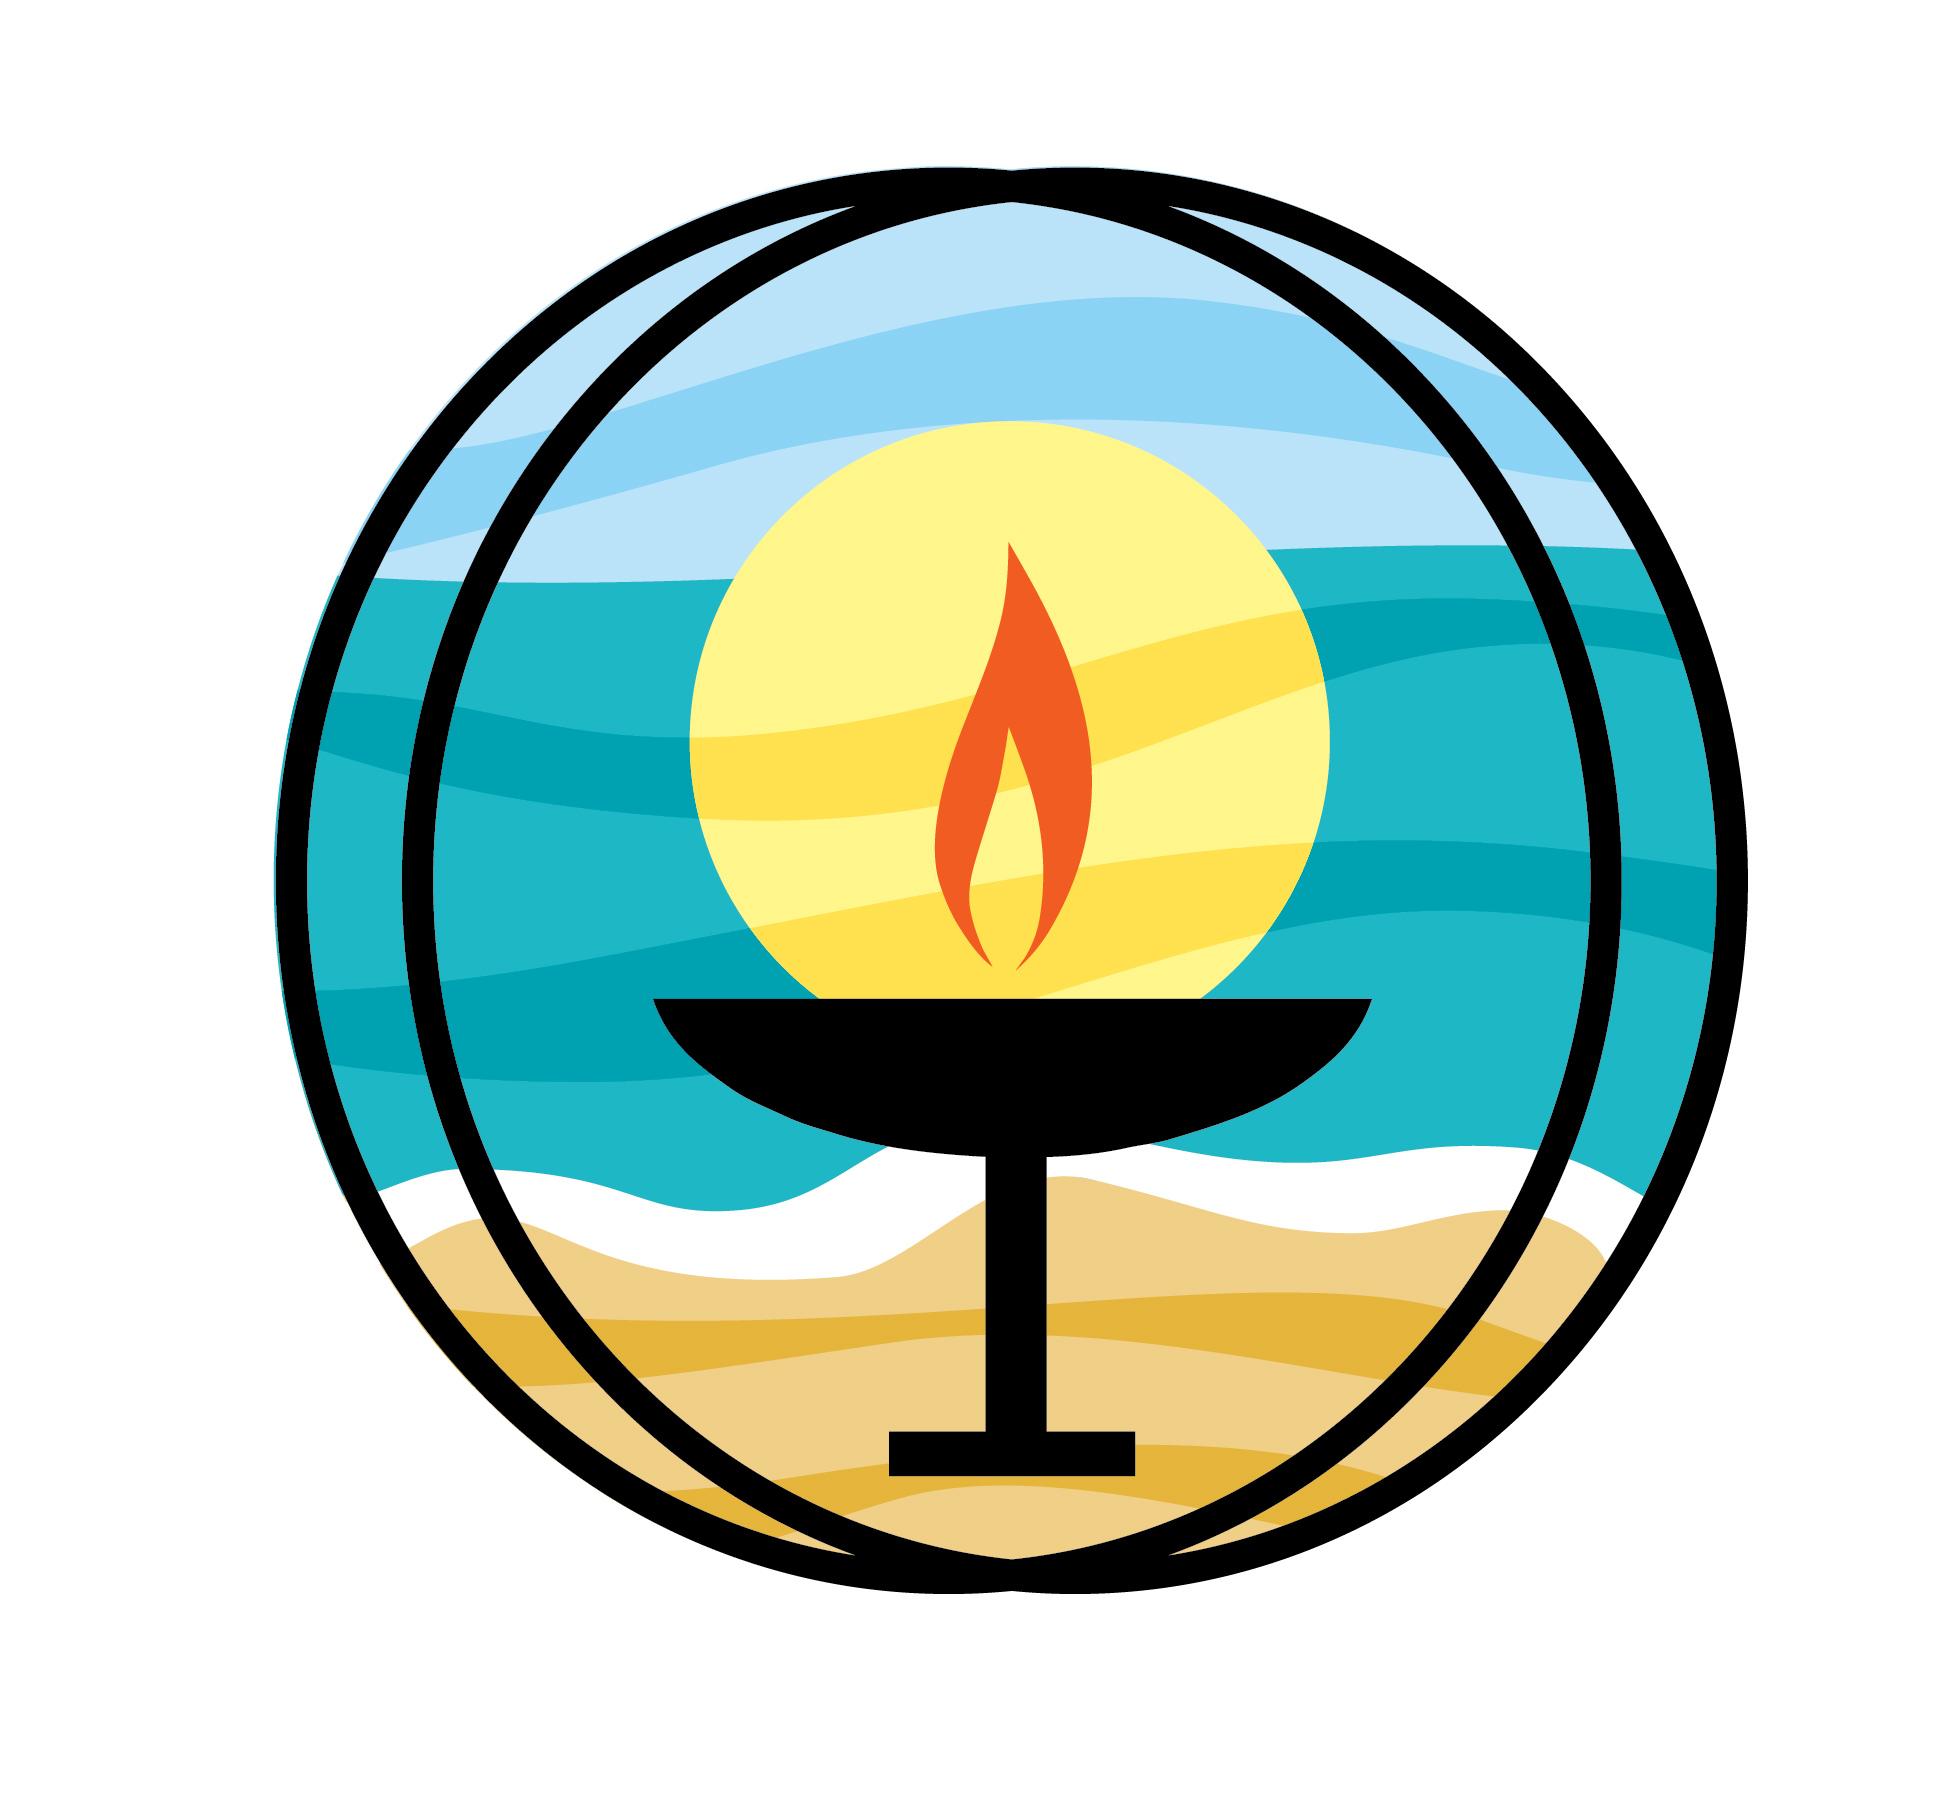 Chalice Logo - UUSD Chalice Images, Graphics, & Colors - Unitarian Universalists of ...